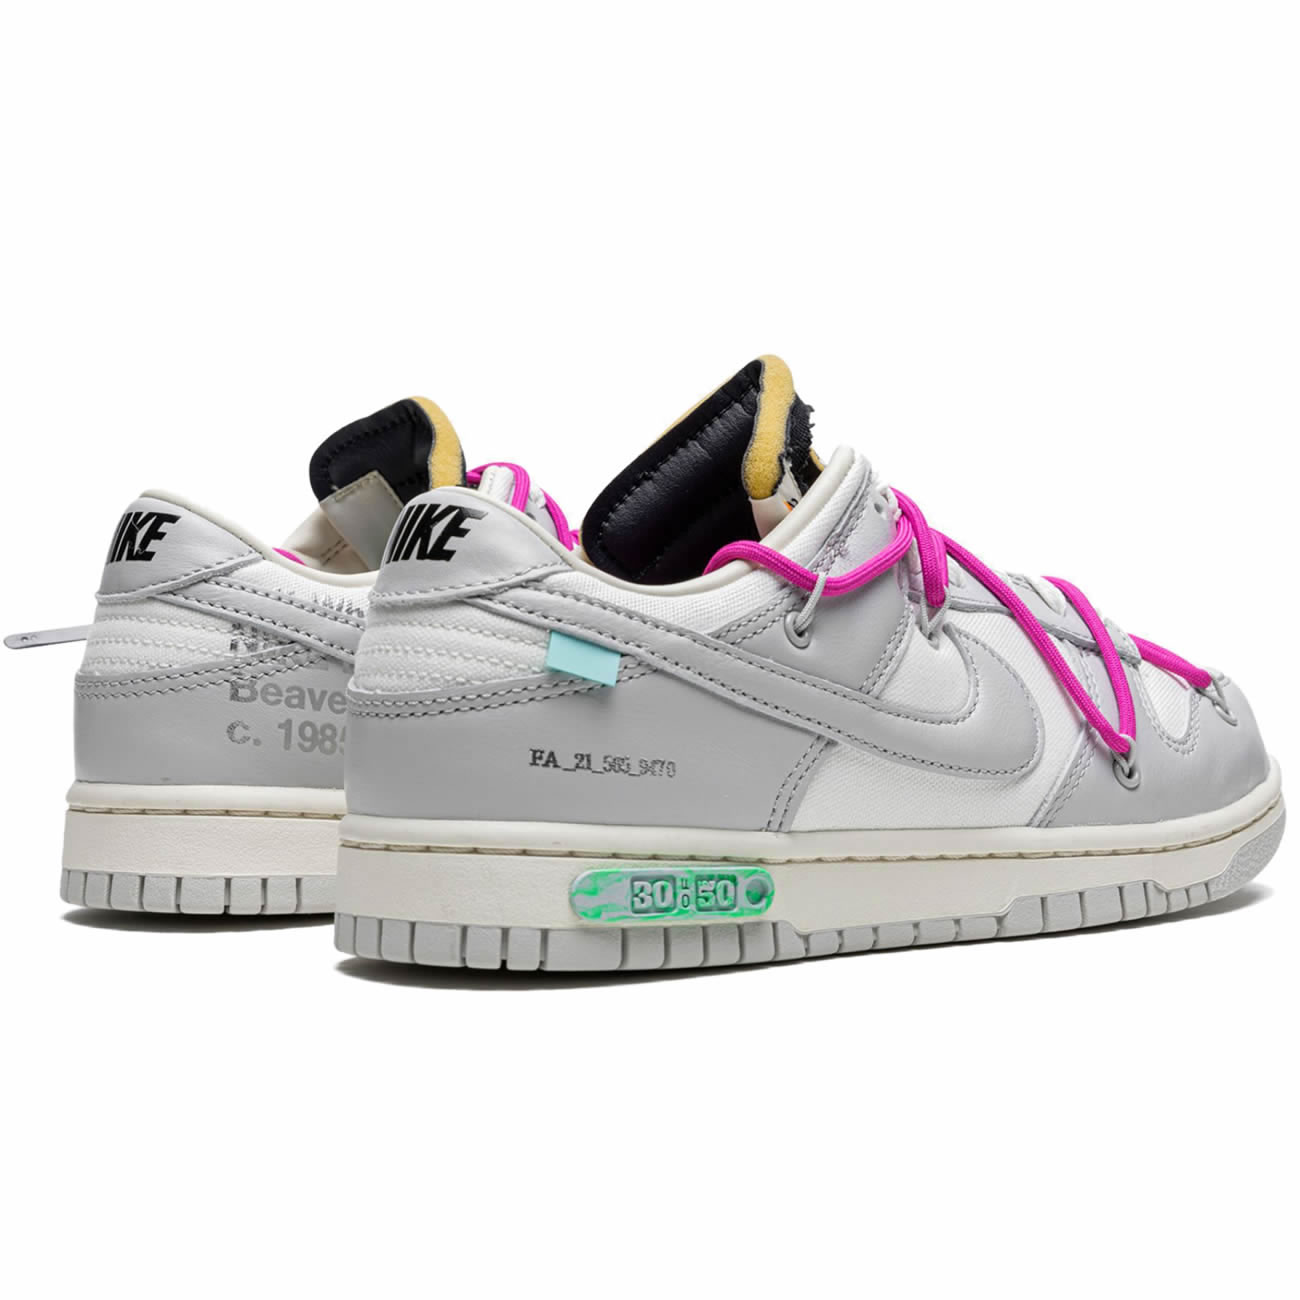 Off White Nike Sb Dunk Low Lot 30 Of 50 Sail Neutral Grey Pink Dm1602 122 (3) - newkick.org